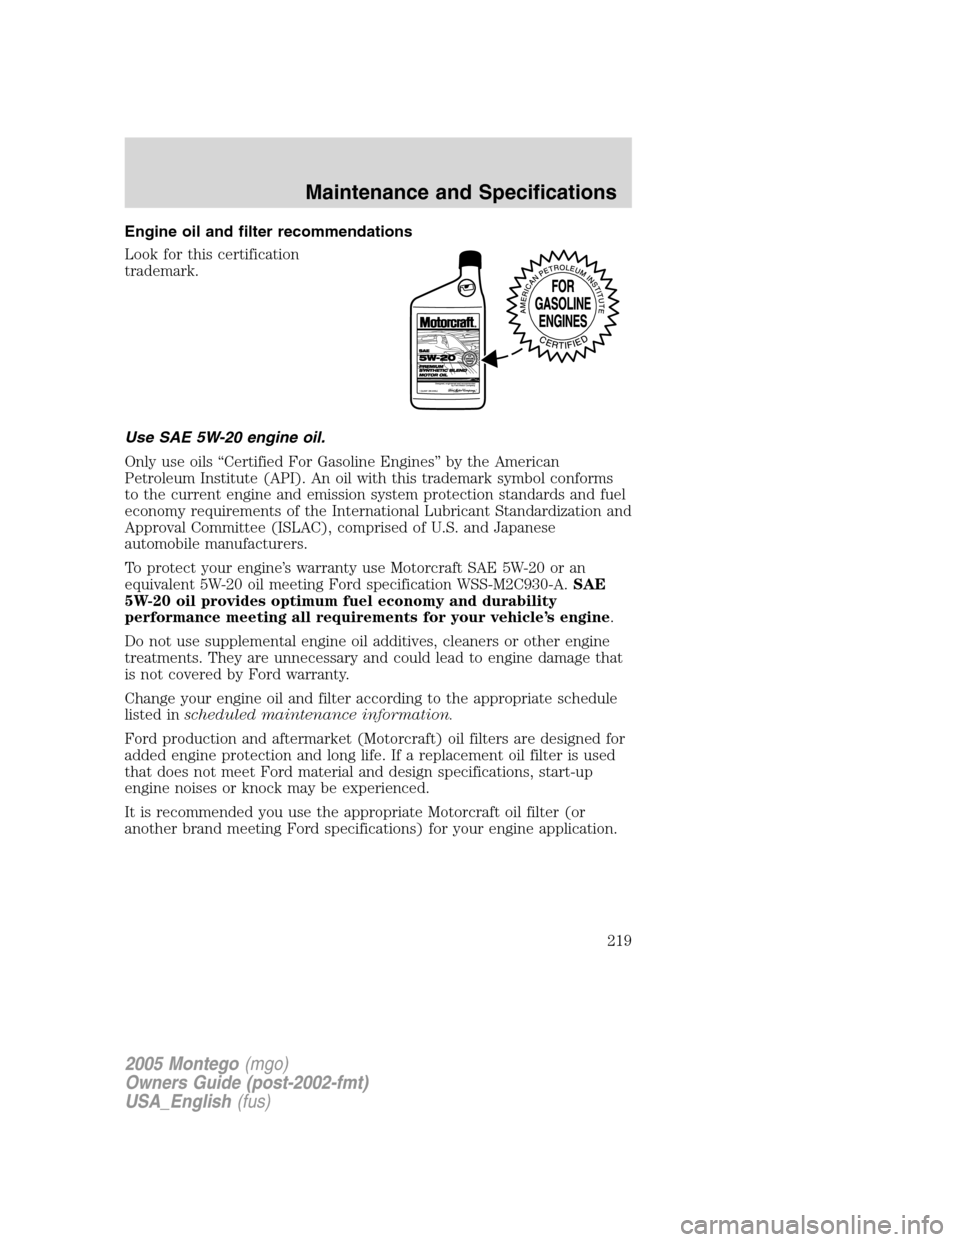 Mercury Montego 2005  Owners Manuals Engine oil and filter recommendations
Look for this certification
trademark.
Use SAE 5W-20 engine oil.
Only use oils “Certified For Gasoline Engines” by the American
Petroleum Institute (API). An 